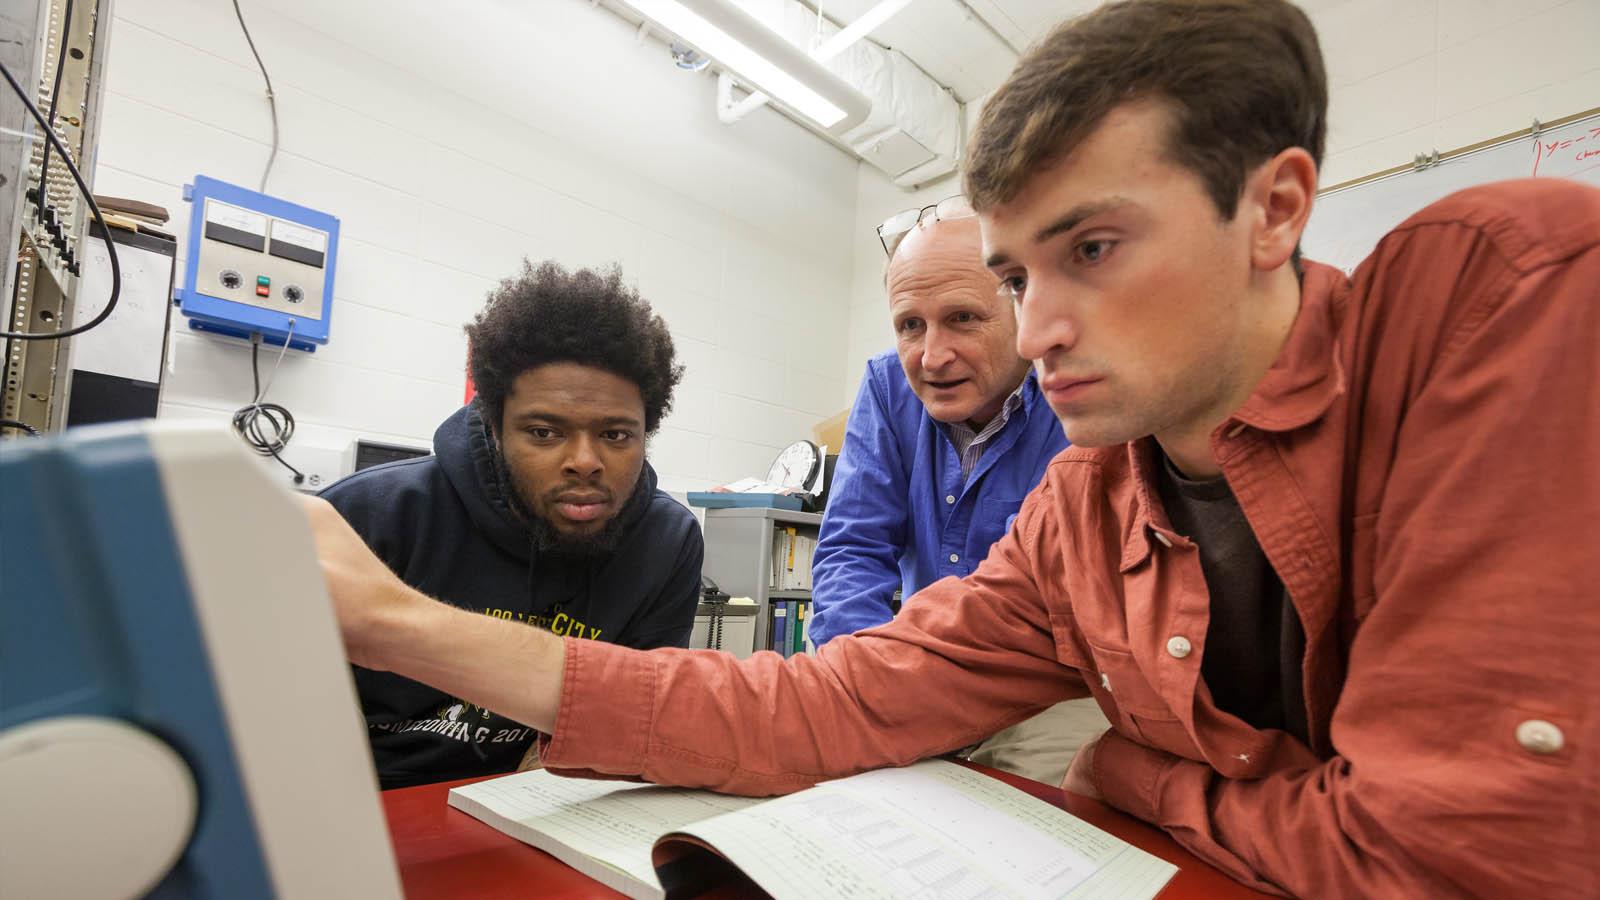 Physics students and faculty reviewing an instrument in a lab